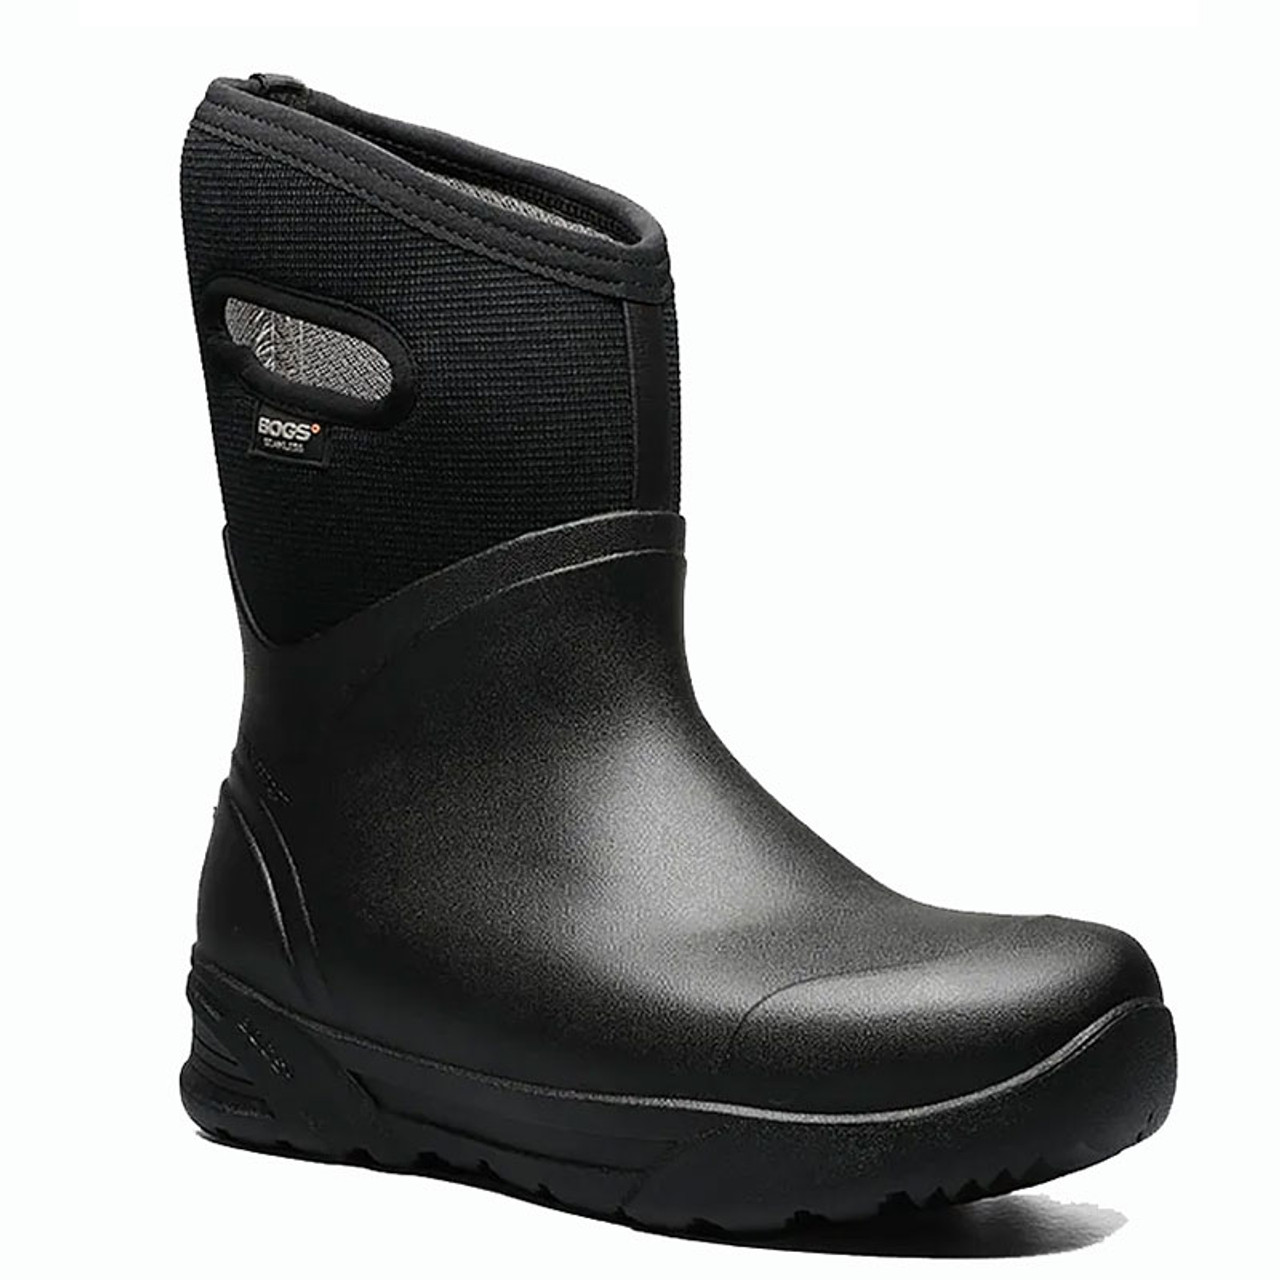 Men's Work Boots & Shoes - Family Footwear Center